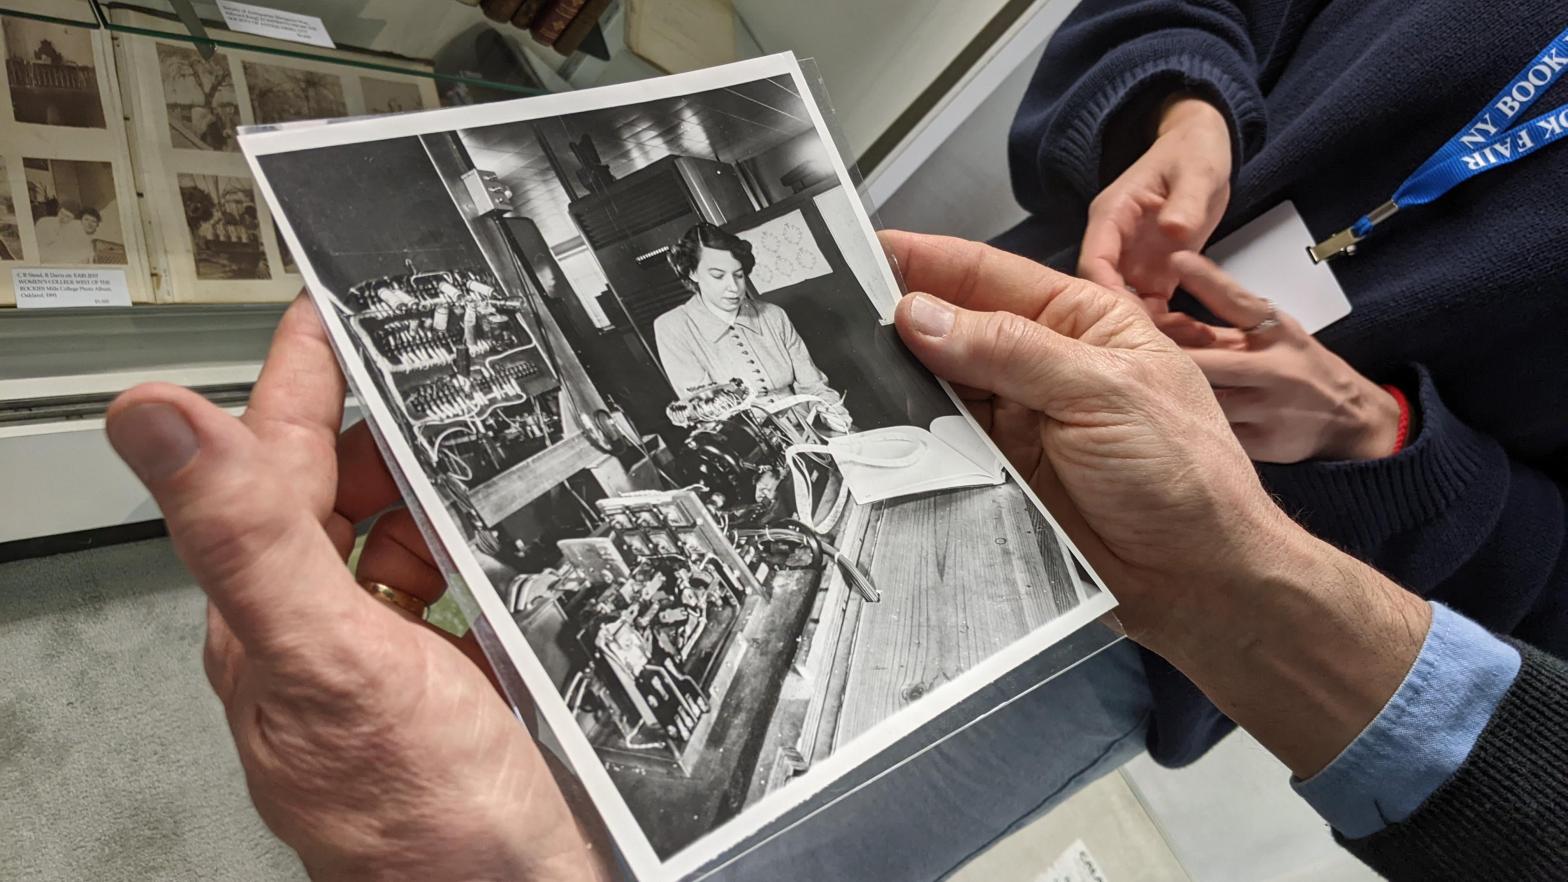 Jean Hall, an early computer scientist and pioneer into the realm of digital computers, feeds perforated paper into an early computing machine in 1953. (Photo: Kyle Barr / Gizmodo)